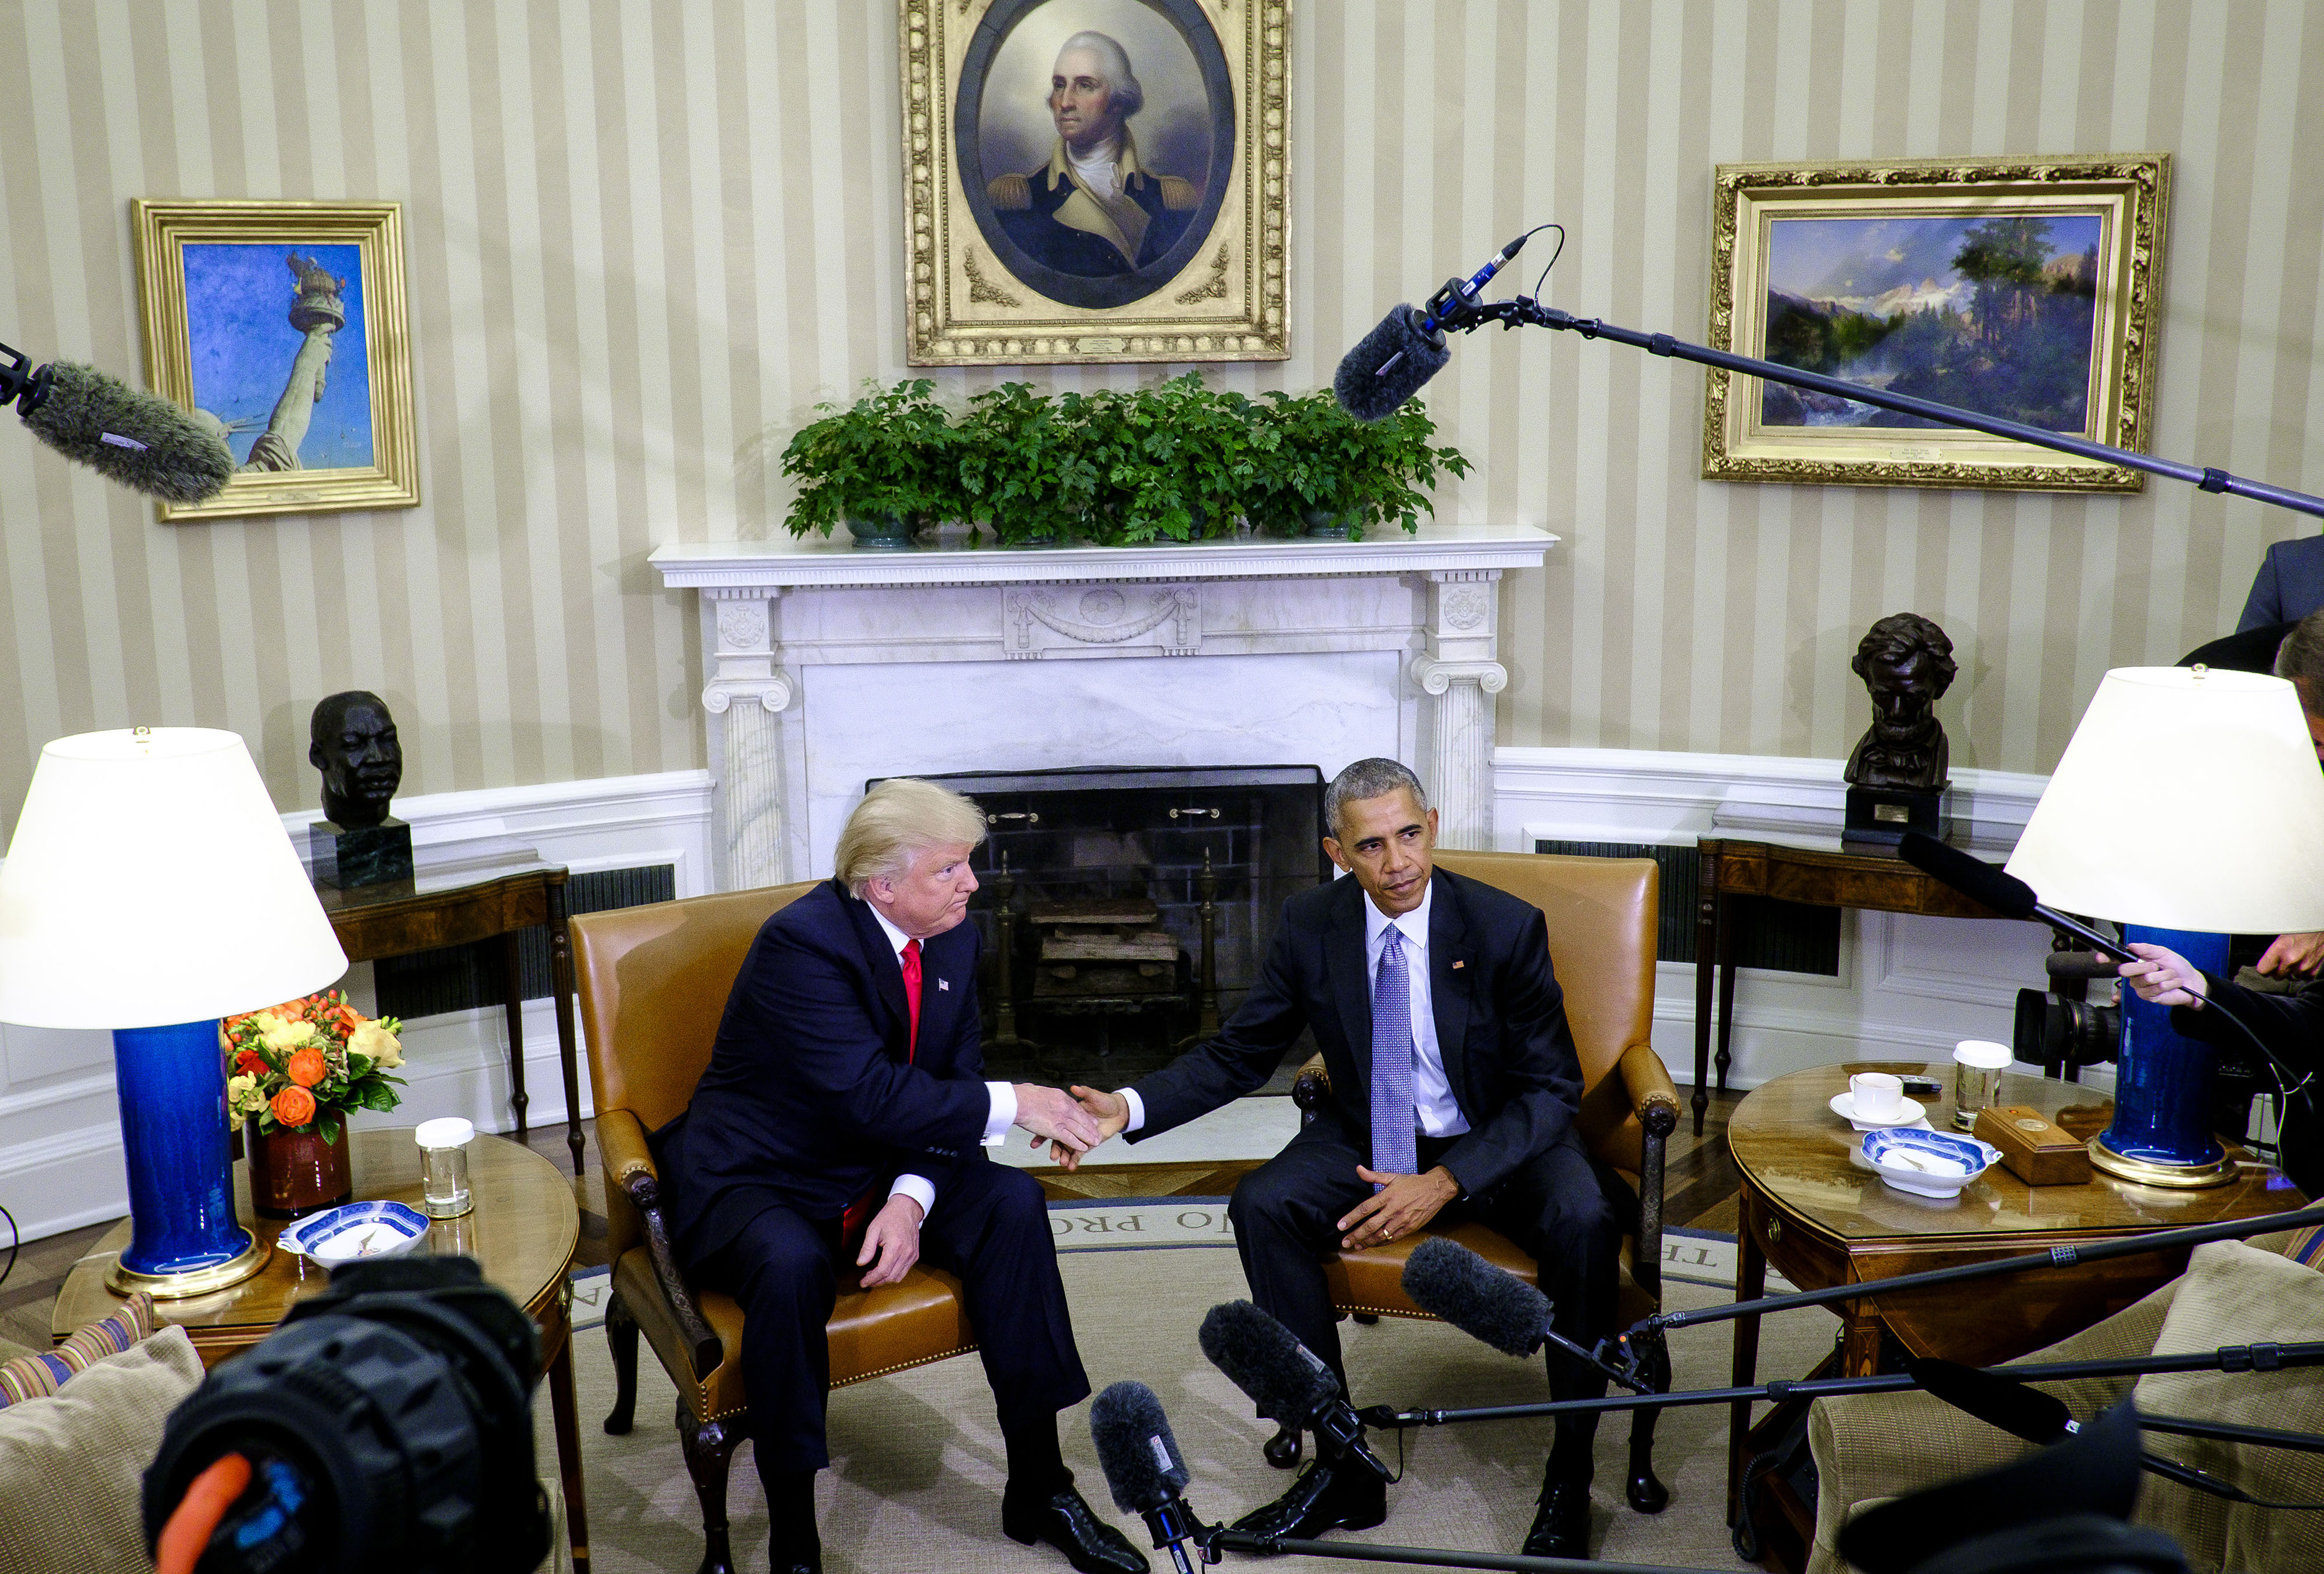 President Barack Obama, right, shakes hands with President-elect Donald Trump during a news conference in the Oval Office of the White House on Nov. 10, 2016. (Pete Marovich—Bloomberg/Getty Images)